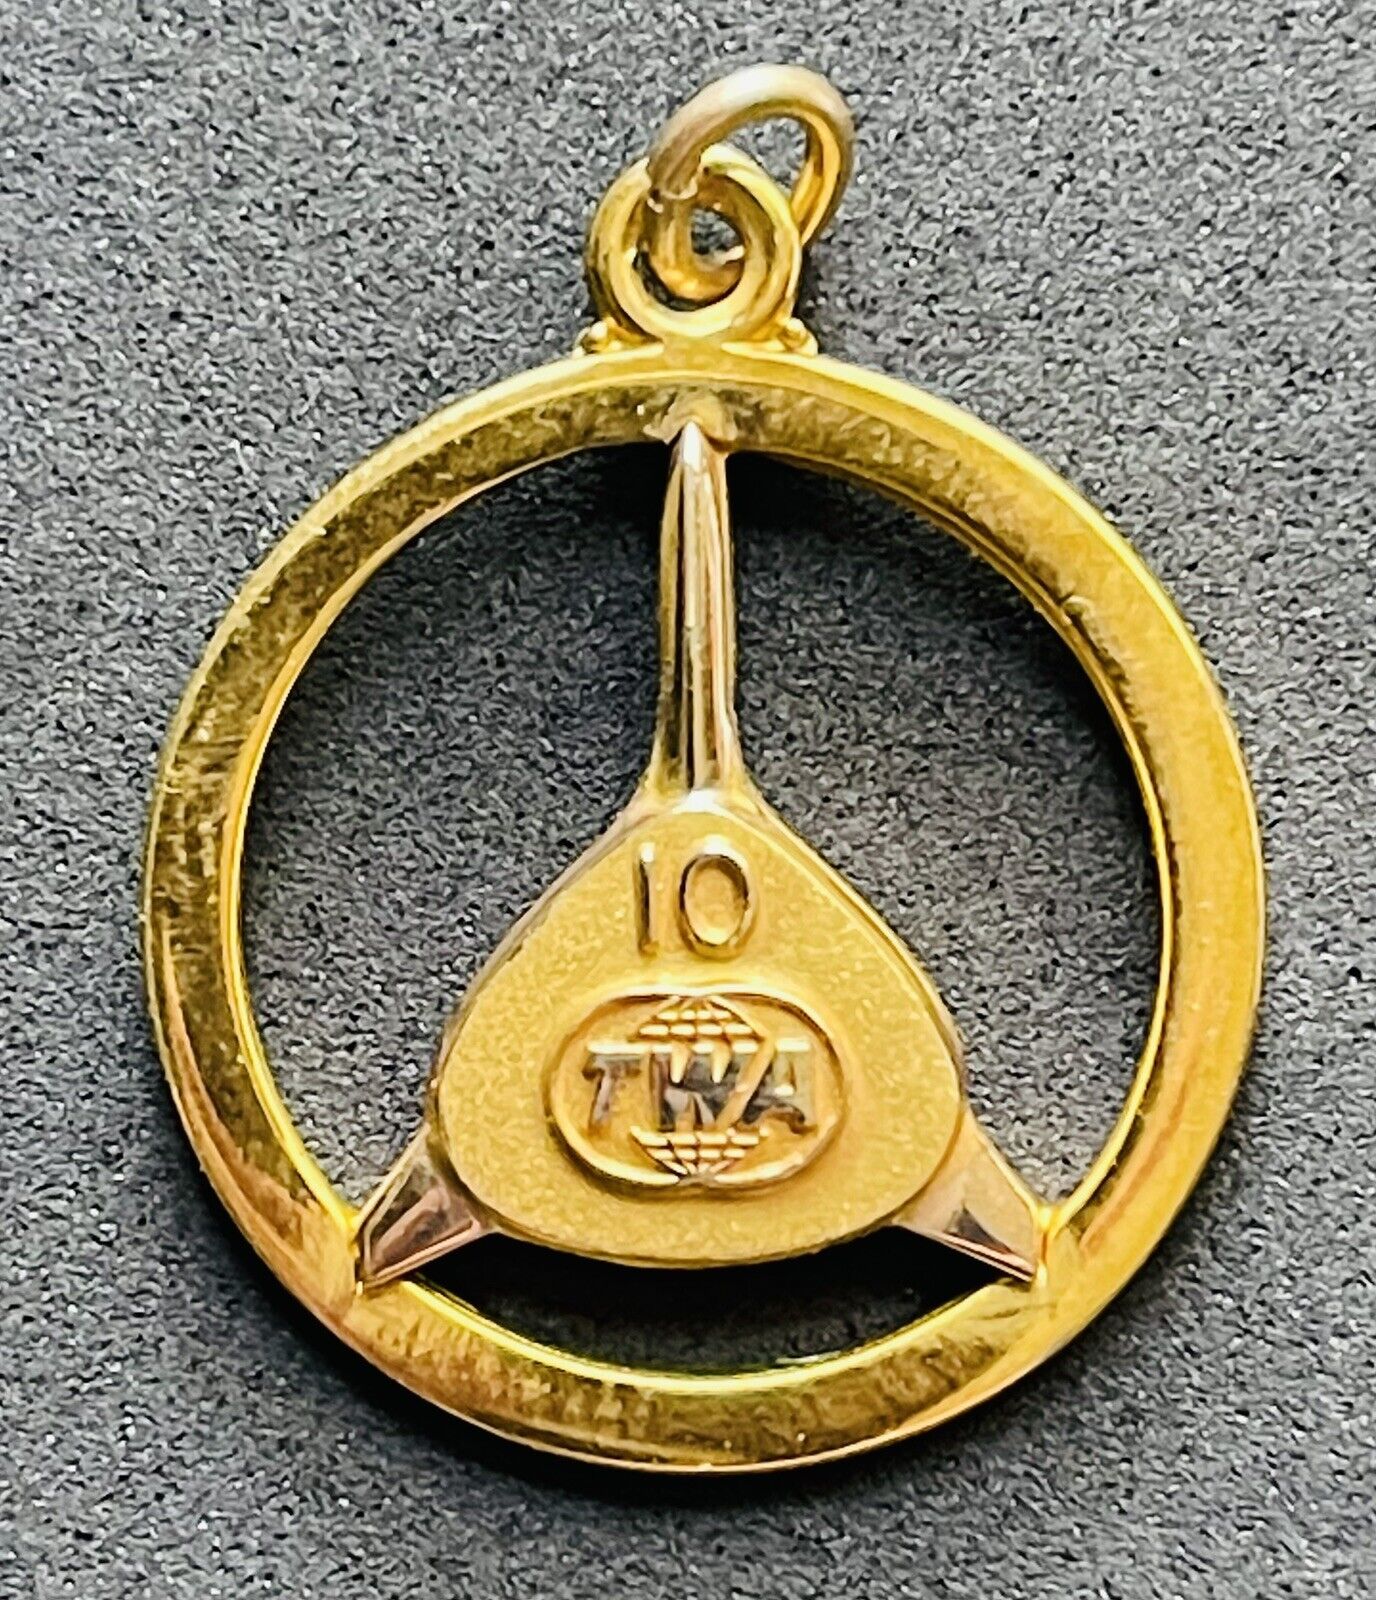 TWA Airlines Gold Pendant Charm - 10 Year Service